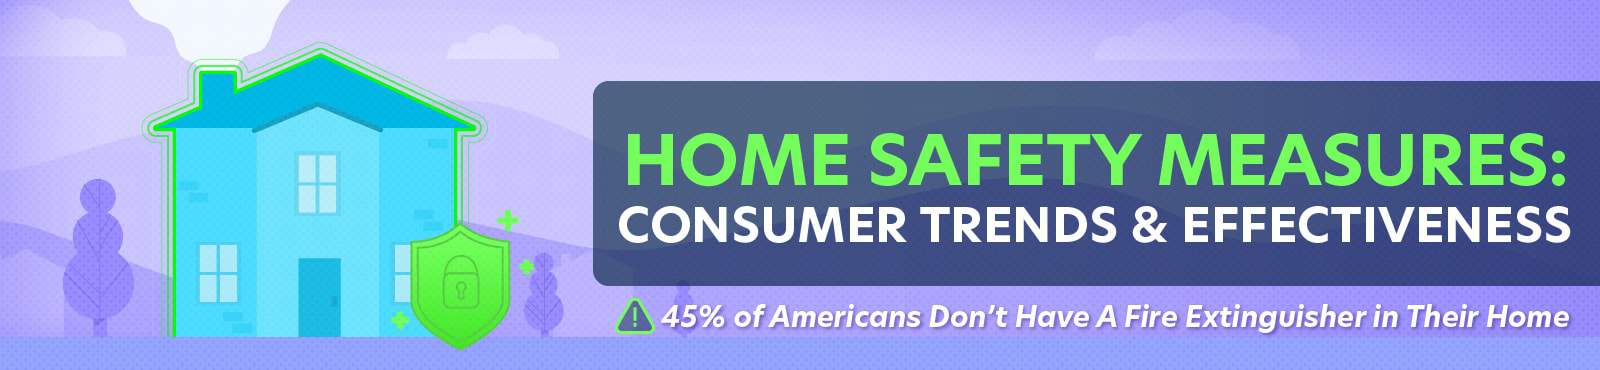 Home Safety Measures: Consumer Trends & Effectiveness Featured Image